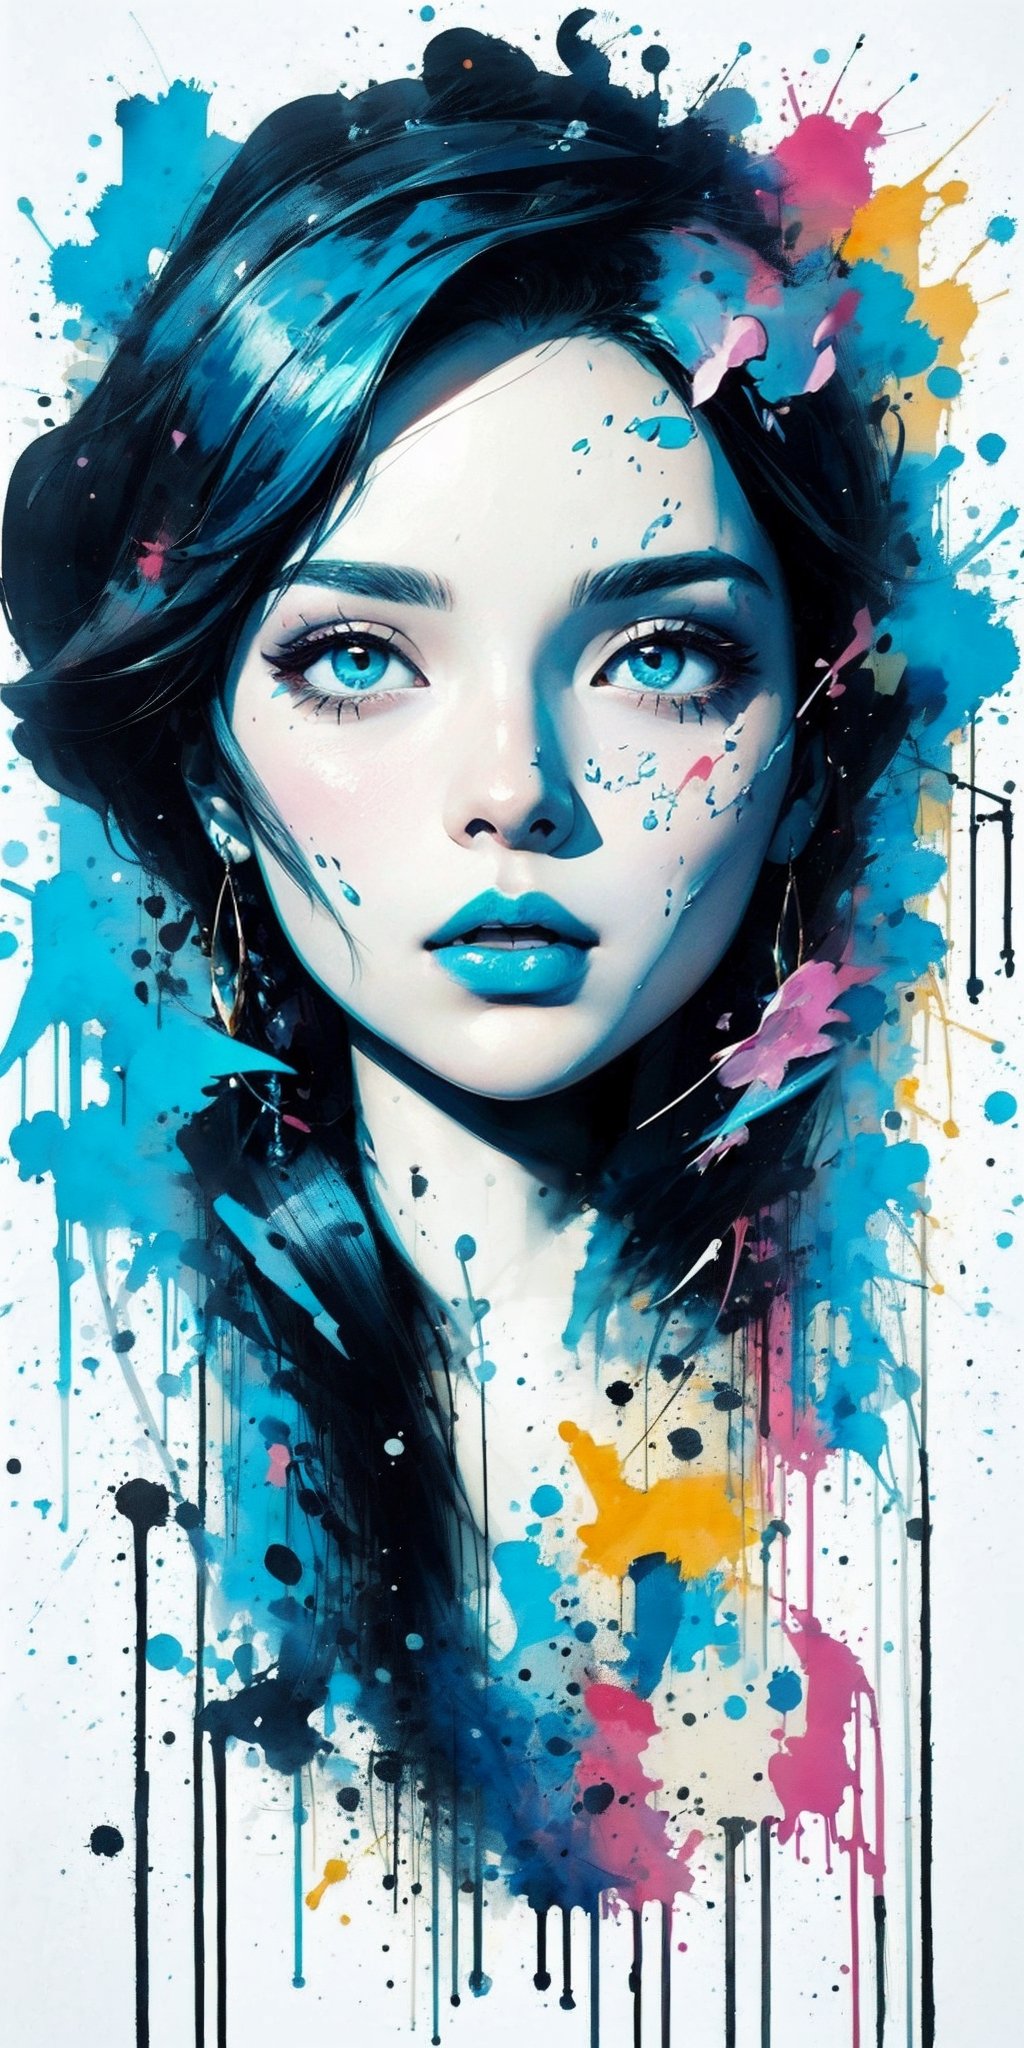 graffitiStyle
Portayal of an amazingly beautiful woman in graffiti style. Black and white colors prevails. Aqua eyes stand out. Picture should be urbanistic and elegant. By Conrad Roset style. Point of view, High quality, 8K resolution, ultra HDR.highres,graffitiStyle,city,Anime